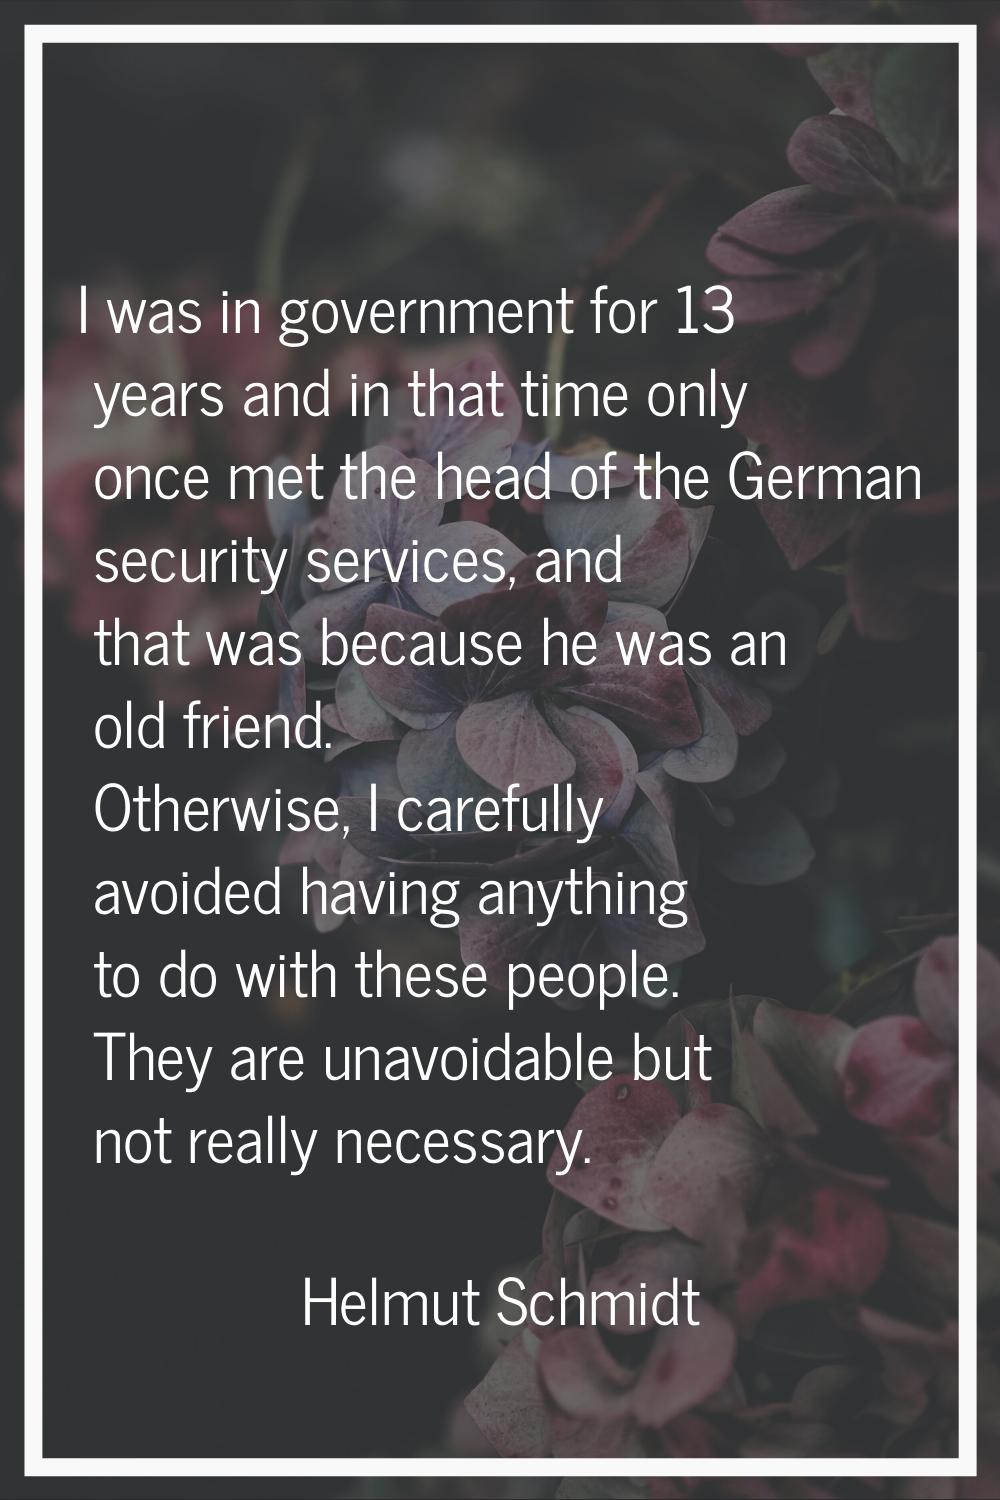 I was in government for 13 years and in that time only once met the head of the German security ser